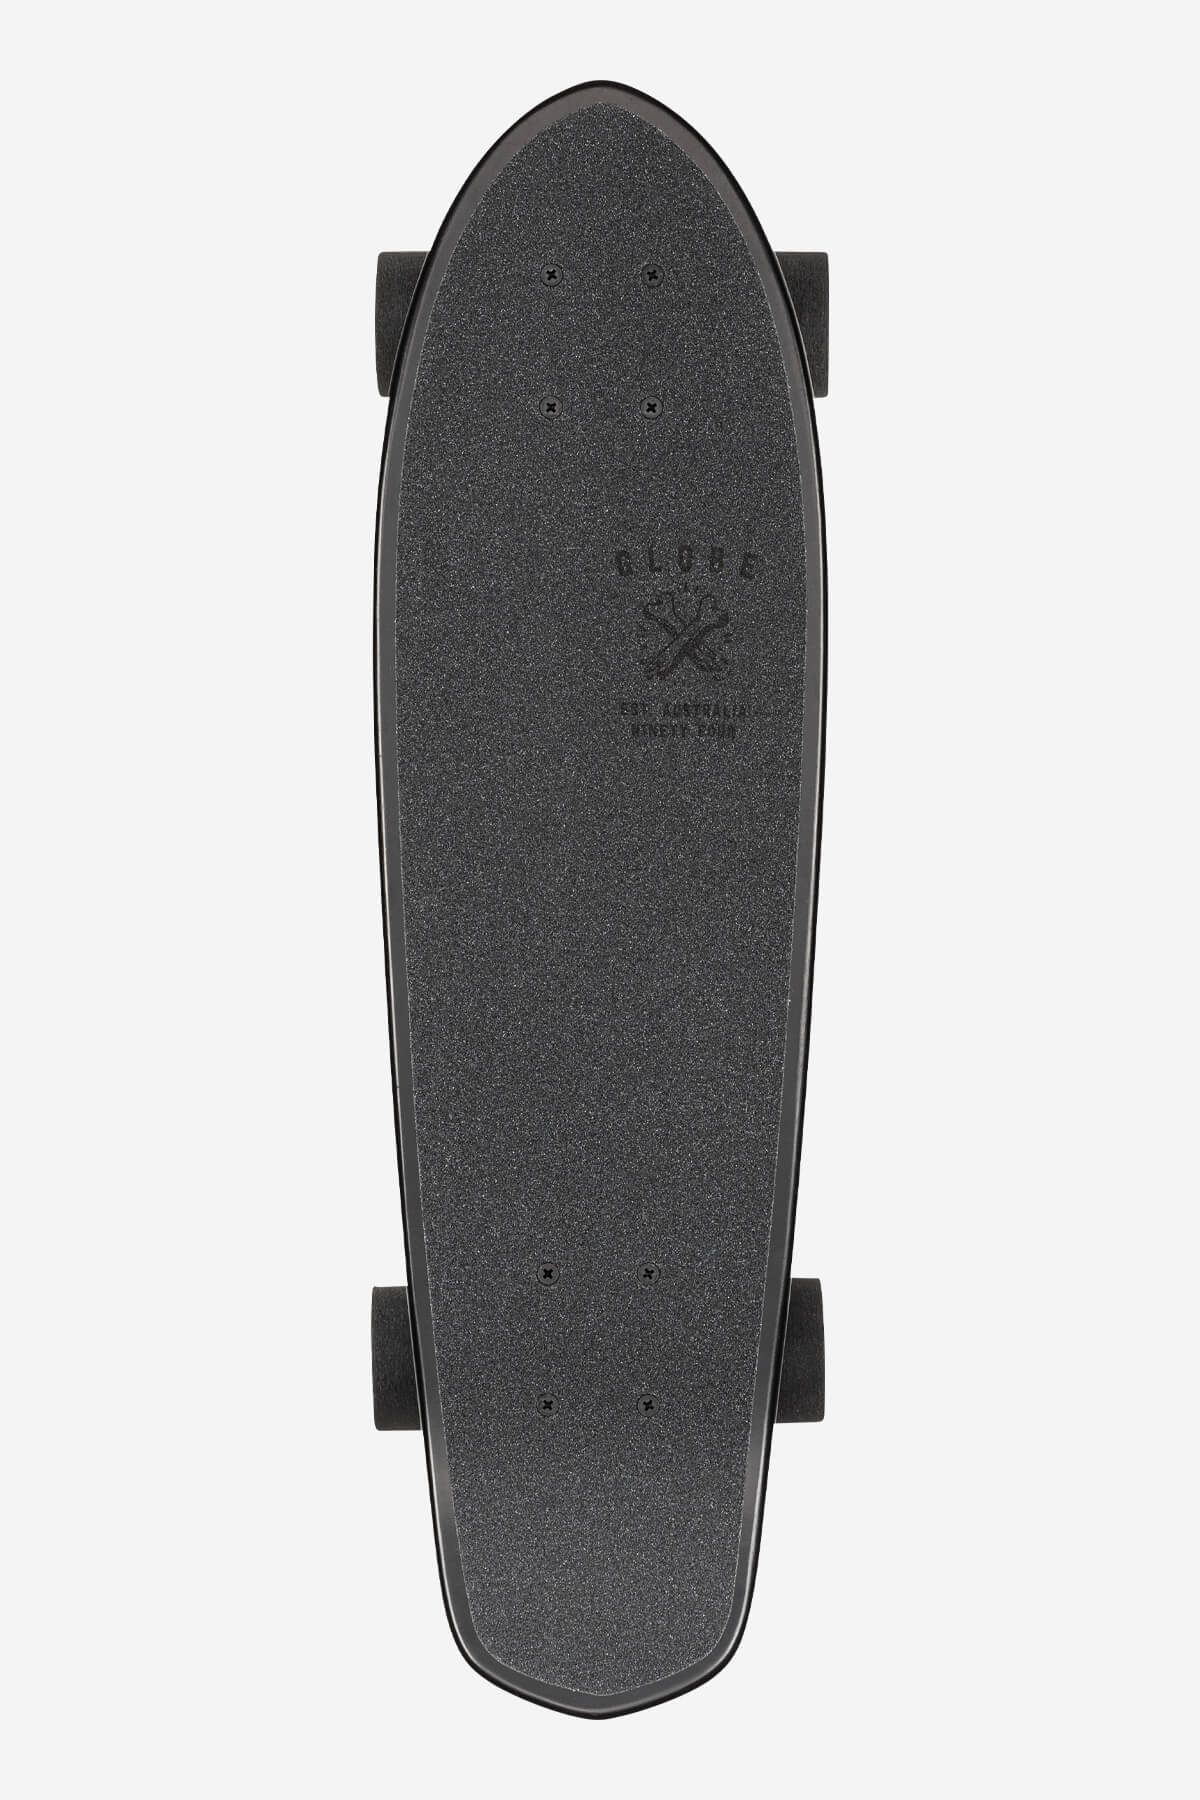 blazer black the f out 26" cruiserboard